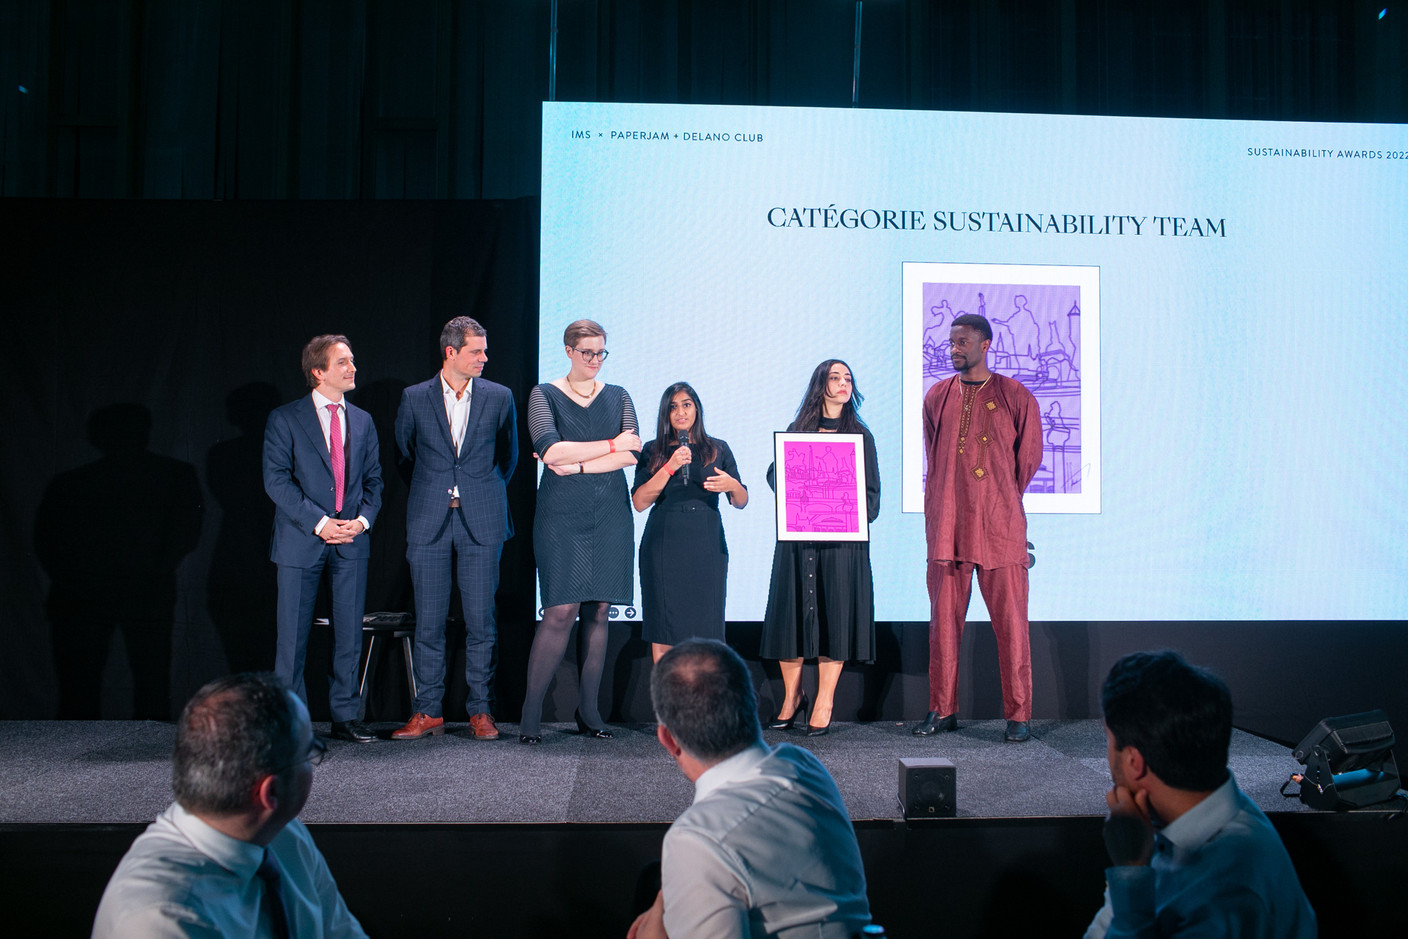 SES, which provides satellite communications services worldwide, was awarded in the Sustainability team category for implementing a new ESG strategy.  Matic Zorman / Maison Moderne